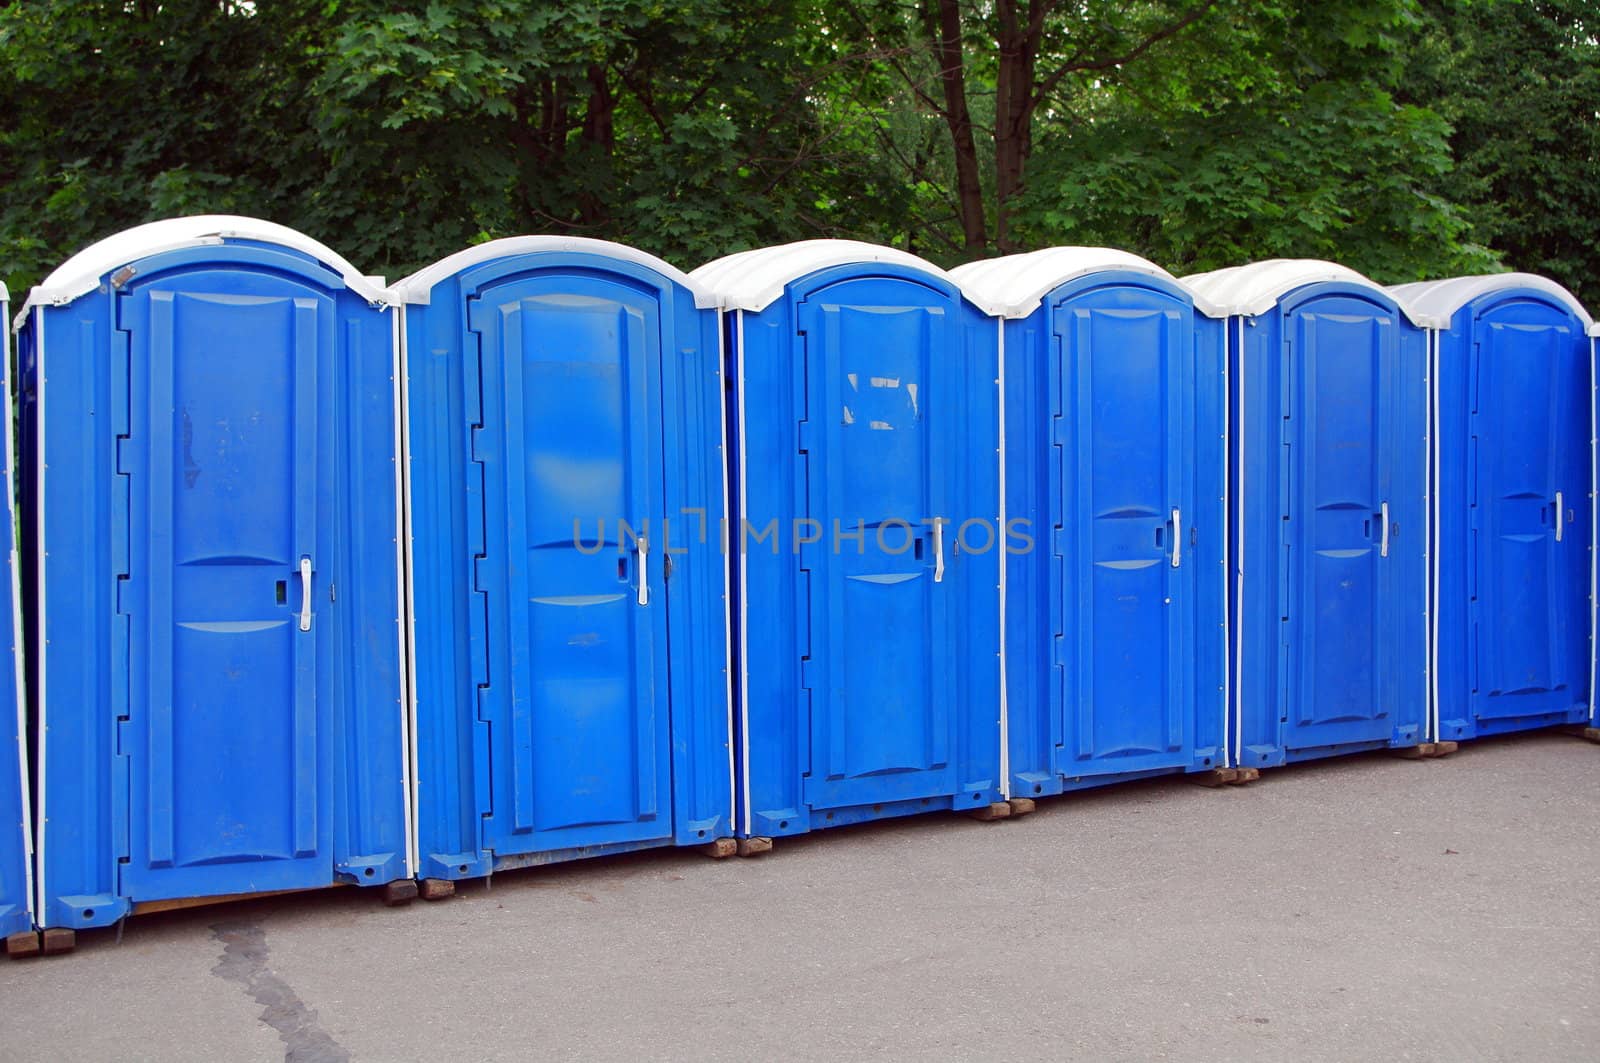 Row of blue public toilets in Moscow park